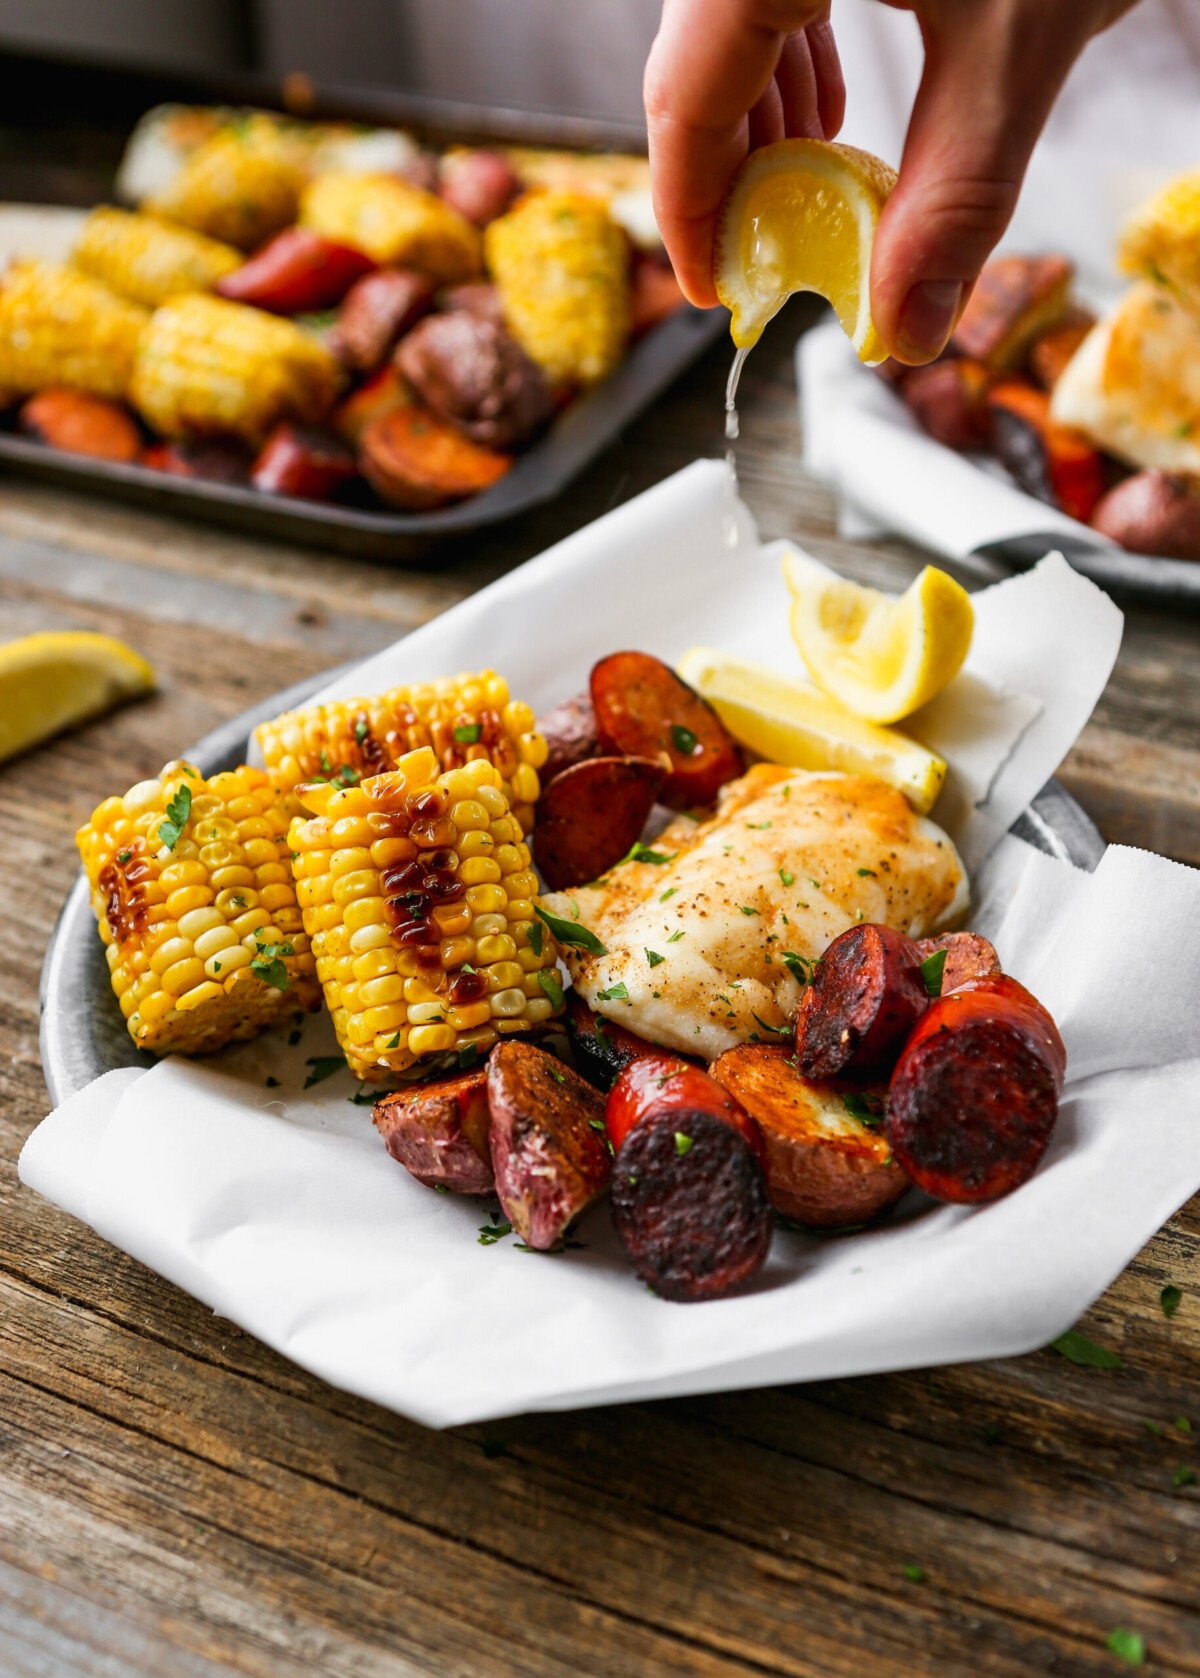 Lemon being squeezed over roasted fish, potatoes, sausage, and corn on paper-lined metal plates set on worn wood surface.